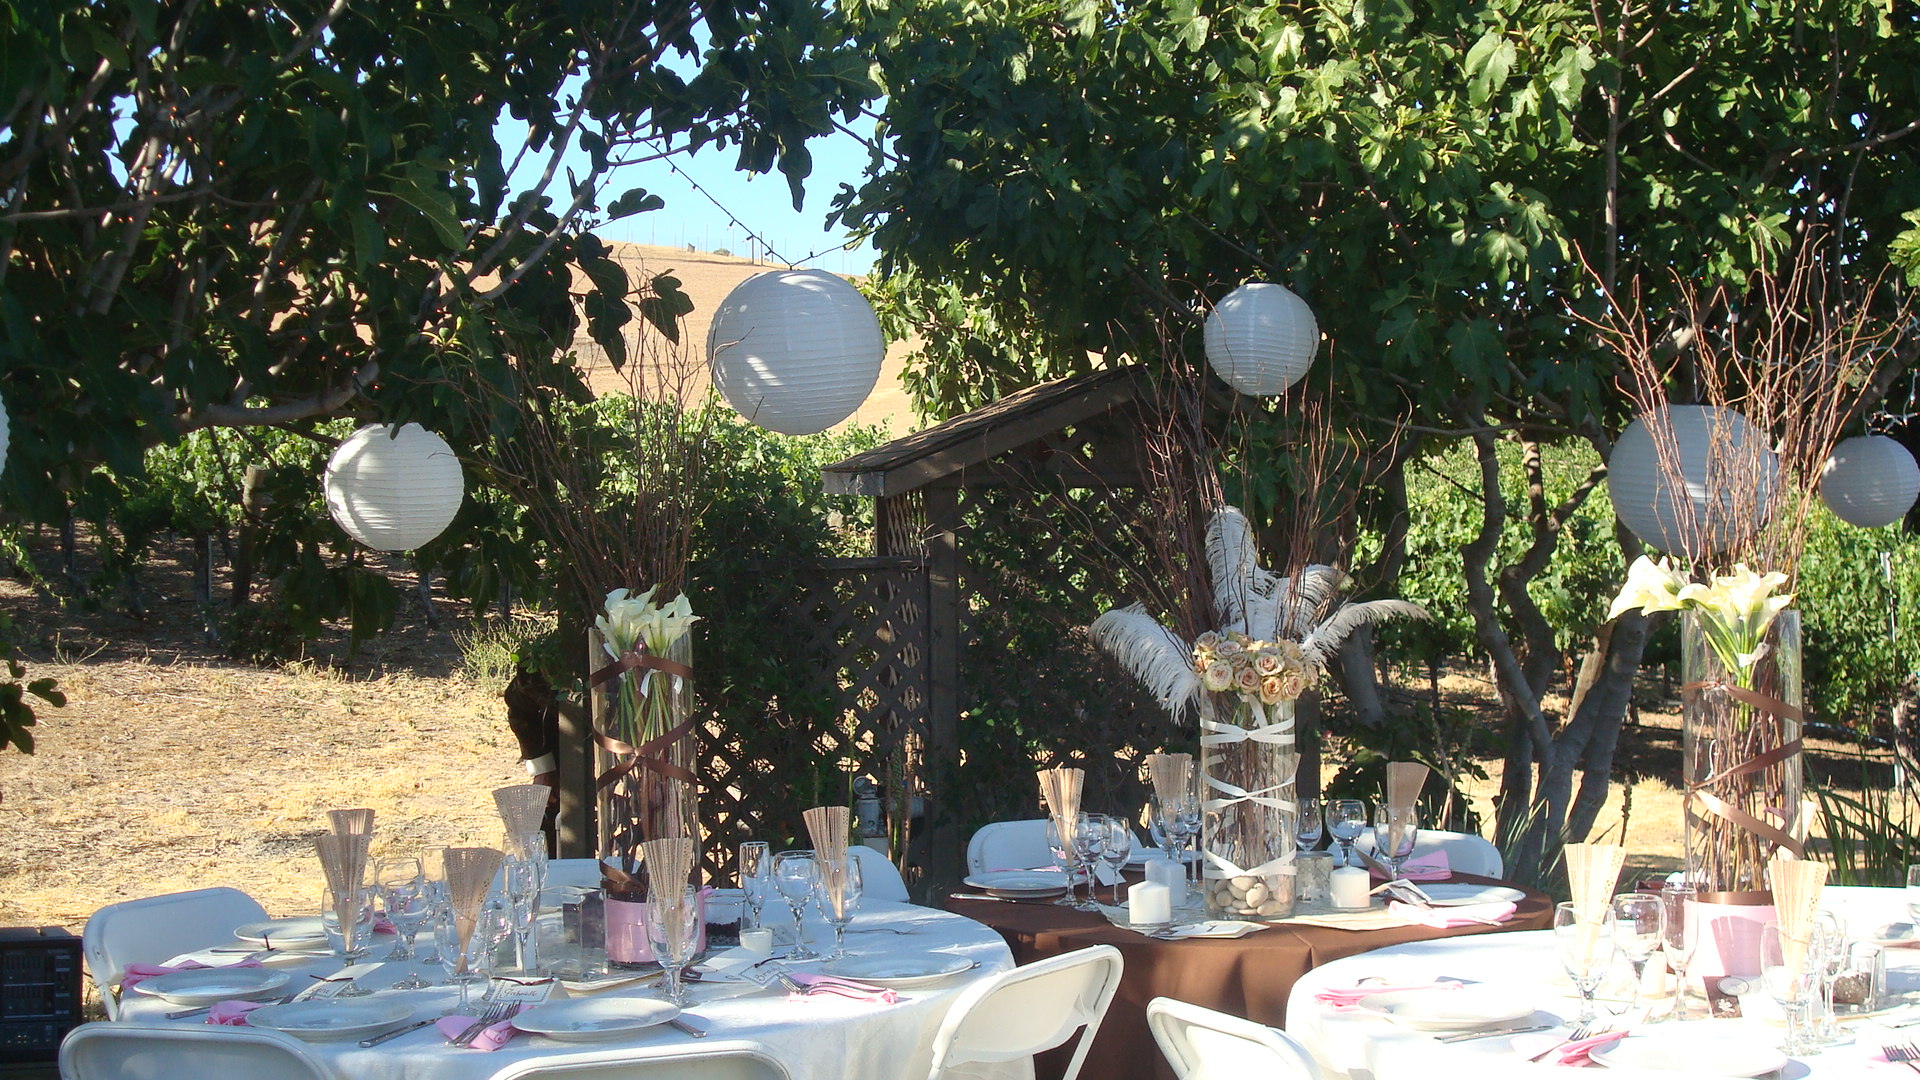 The head tables at the reception site